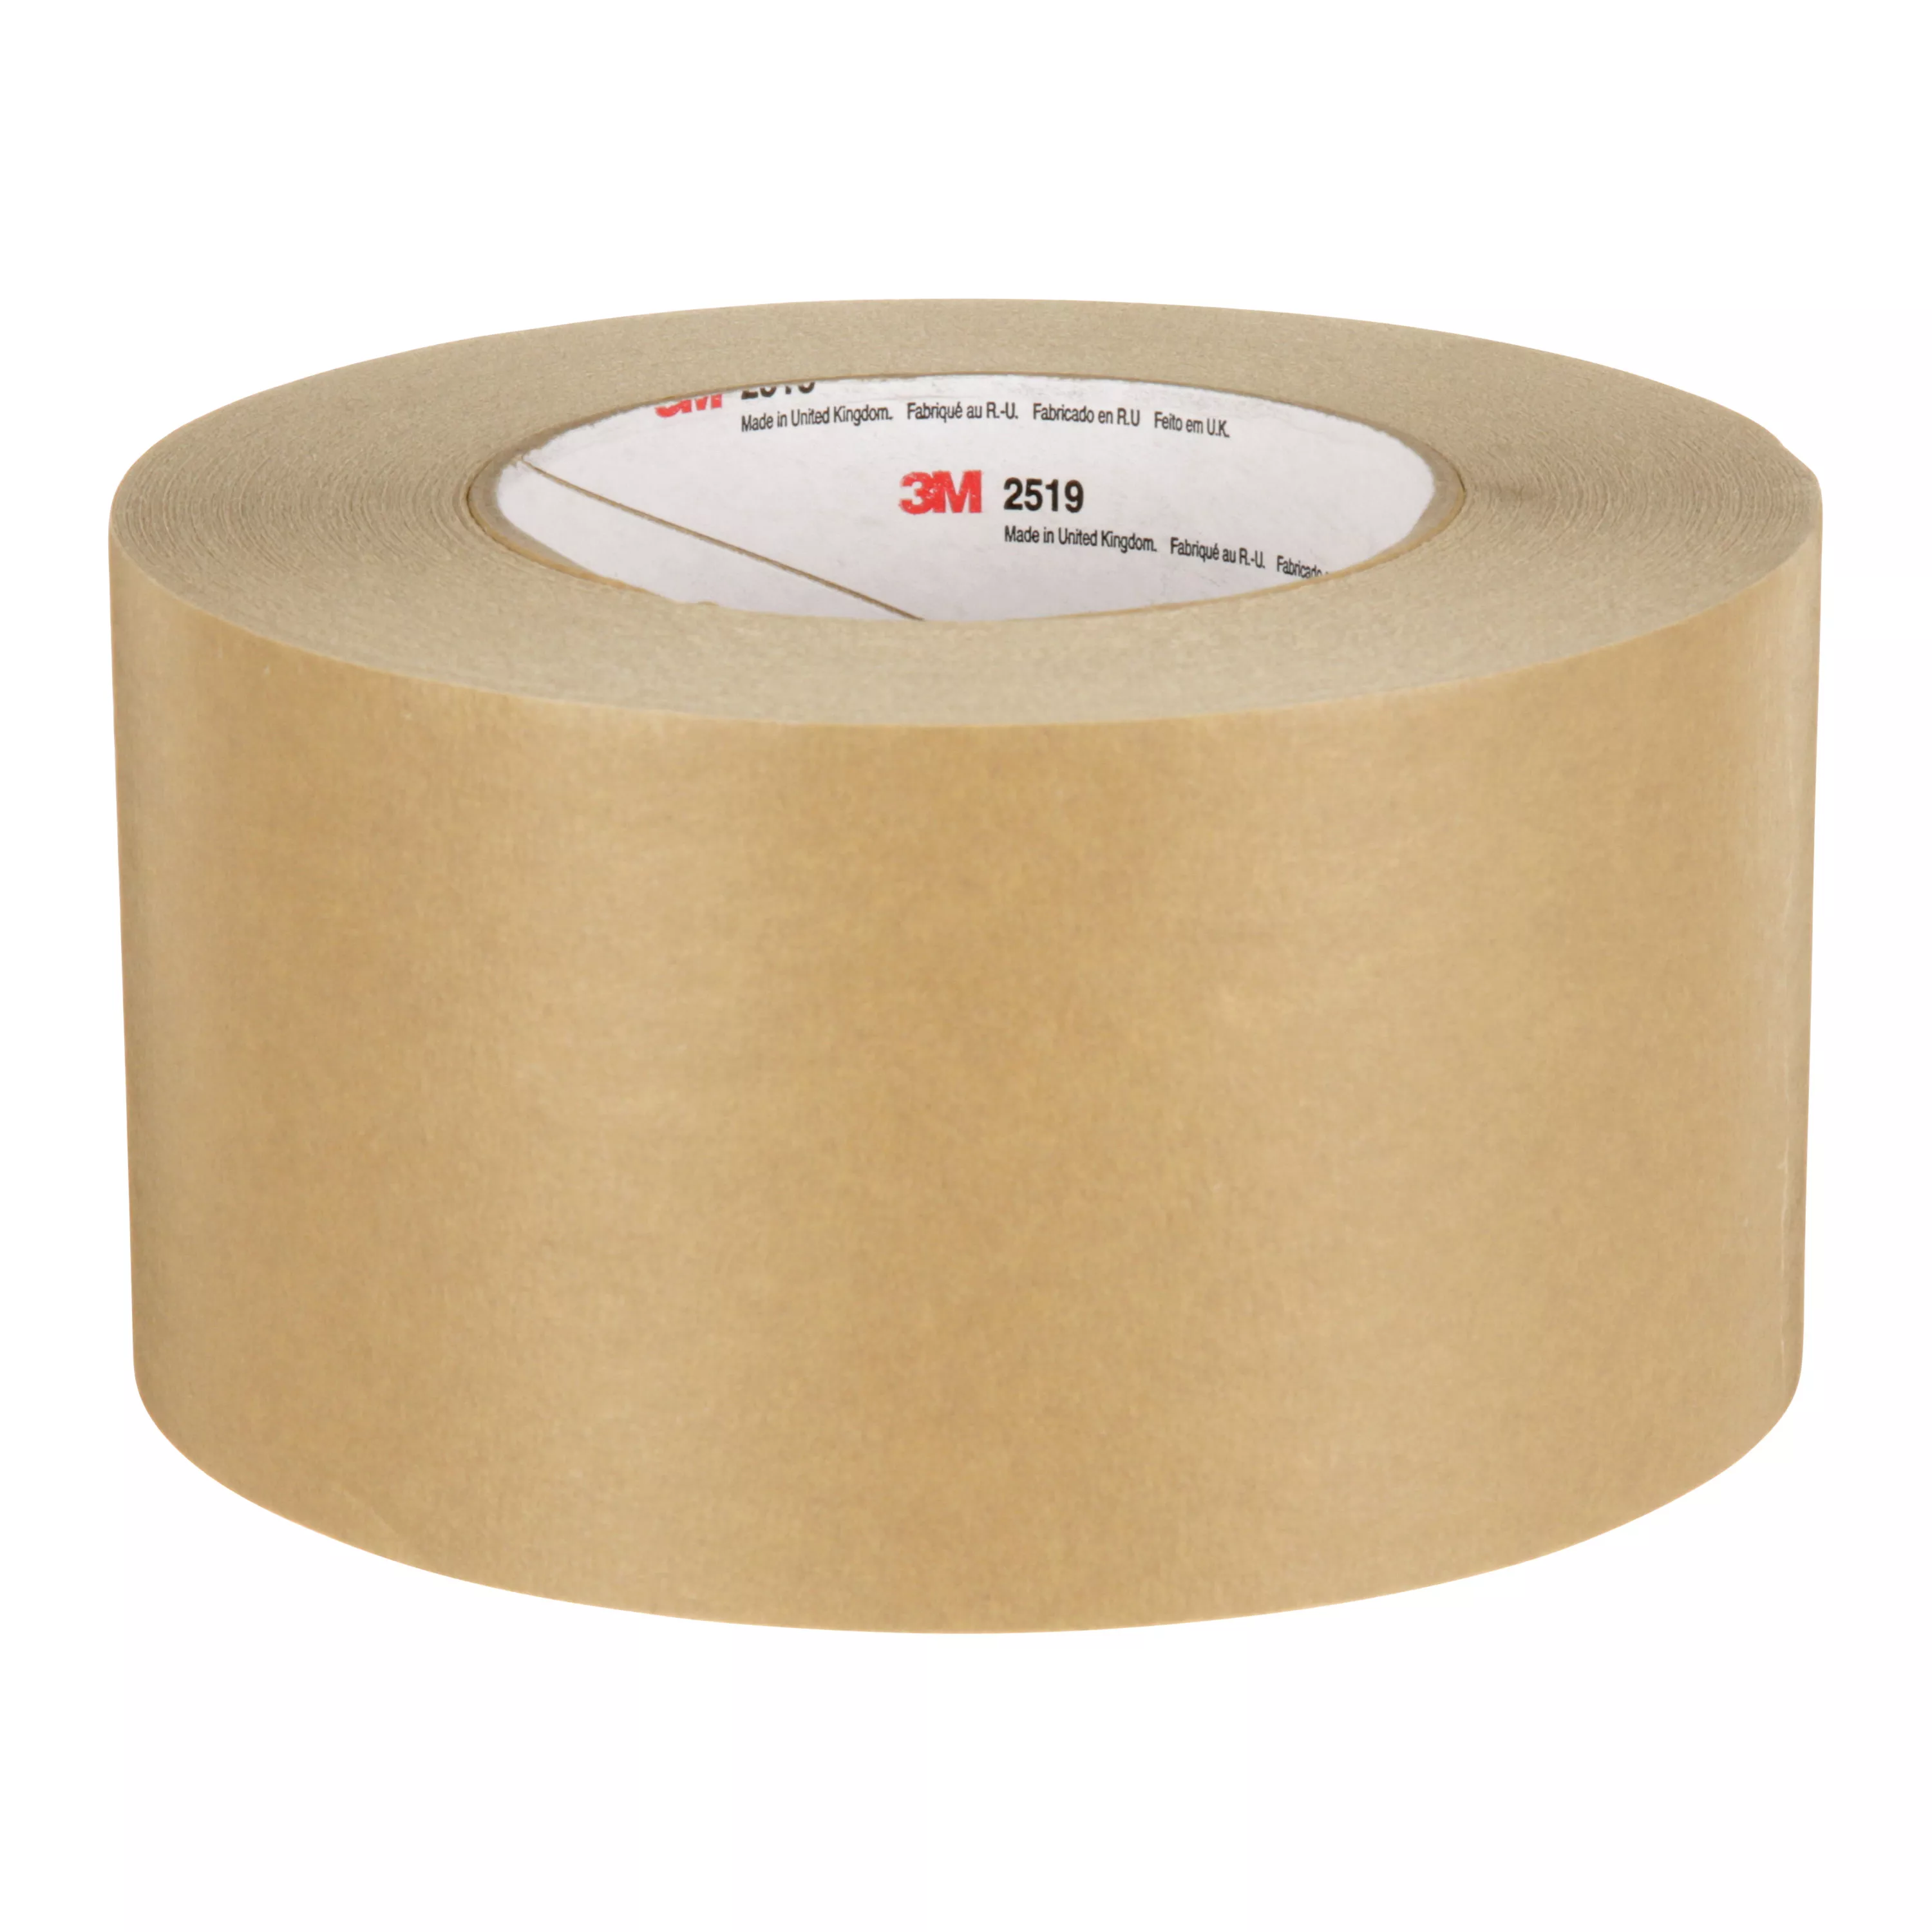 Product Number 2519 | 3M™ High Performance Flatback Tape 2519